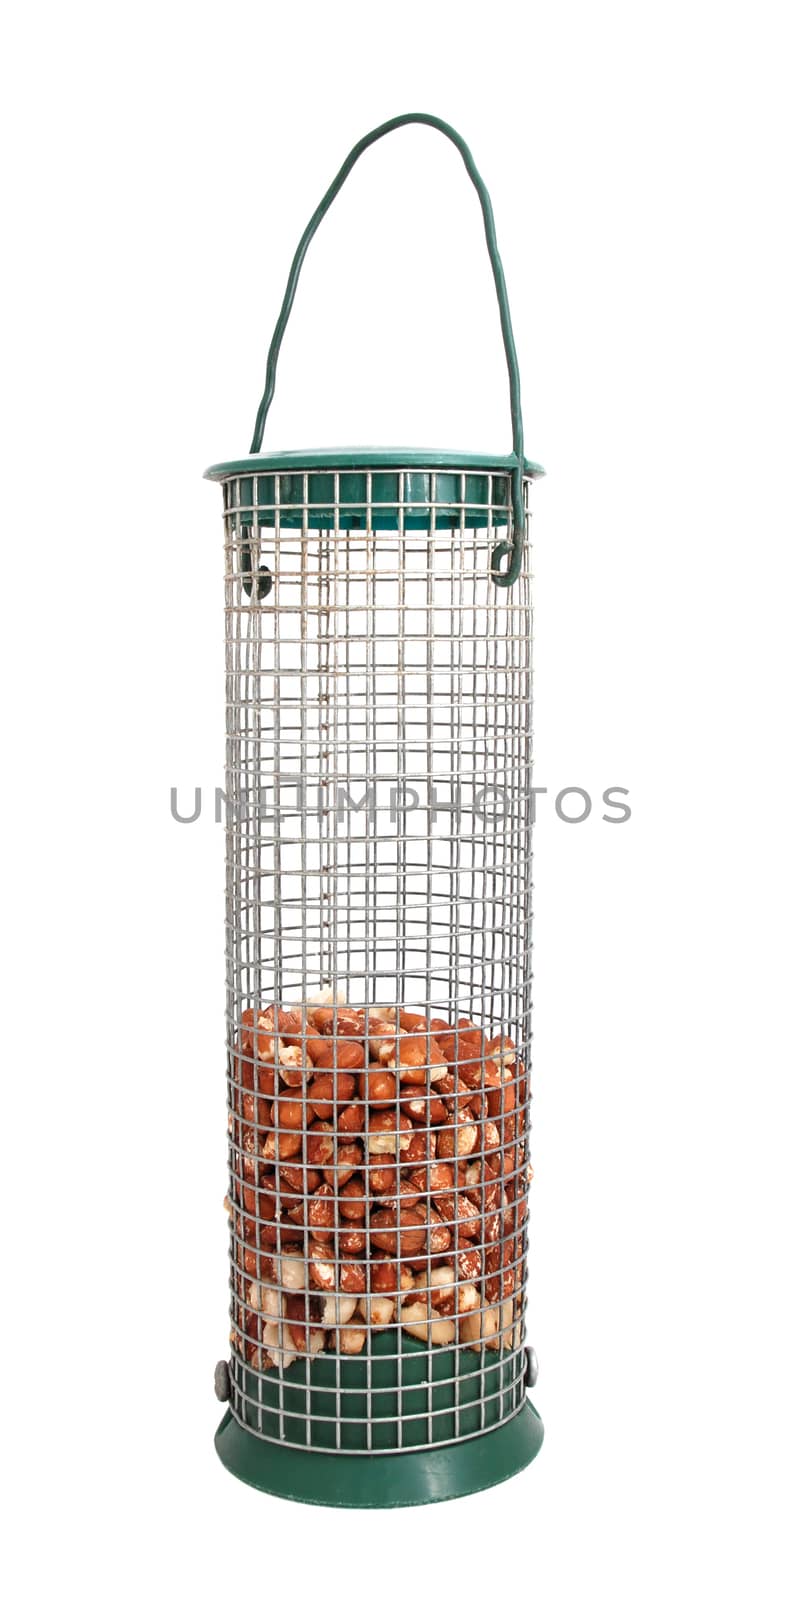 Bird feeder half full of peanuts, isolated on a white background